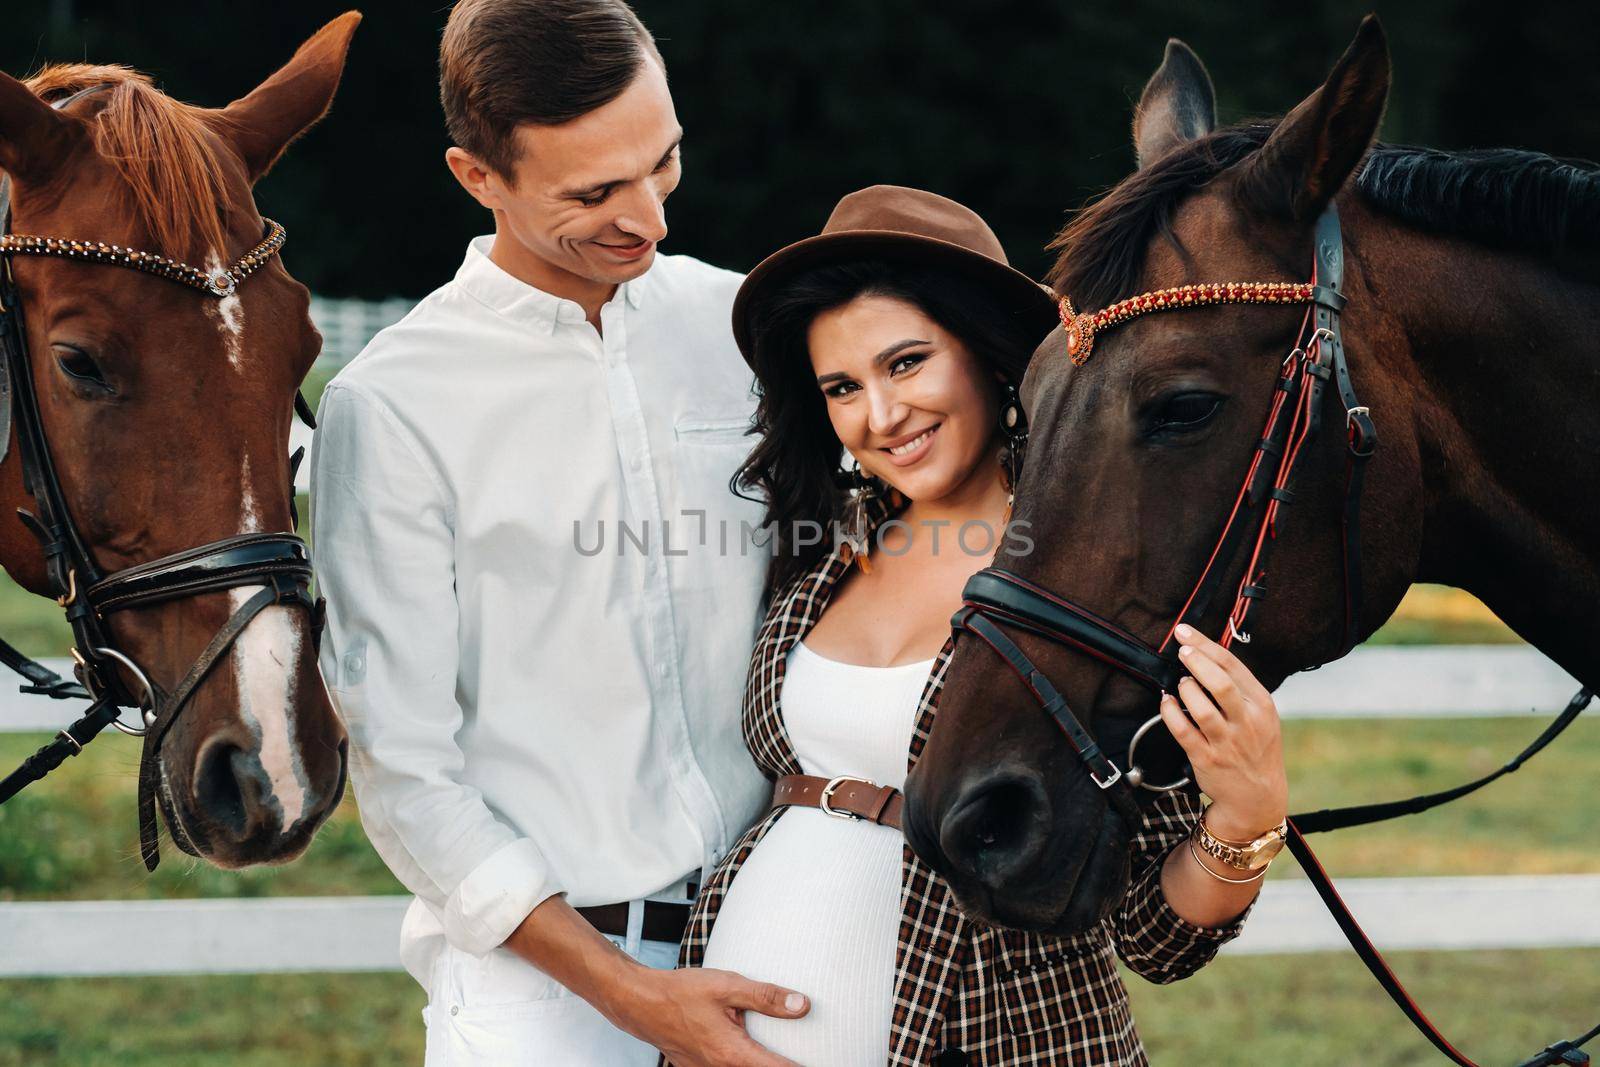 a pregnant girl in a hat and a man in white clothes stand next to horses at a White fence.Stylish family waiting for a child strolling in nature.